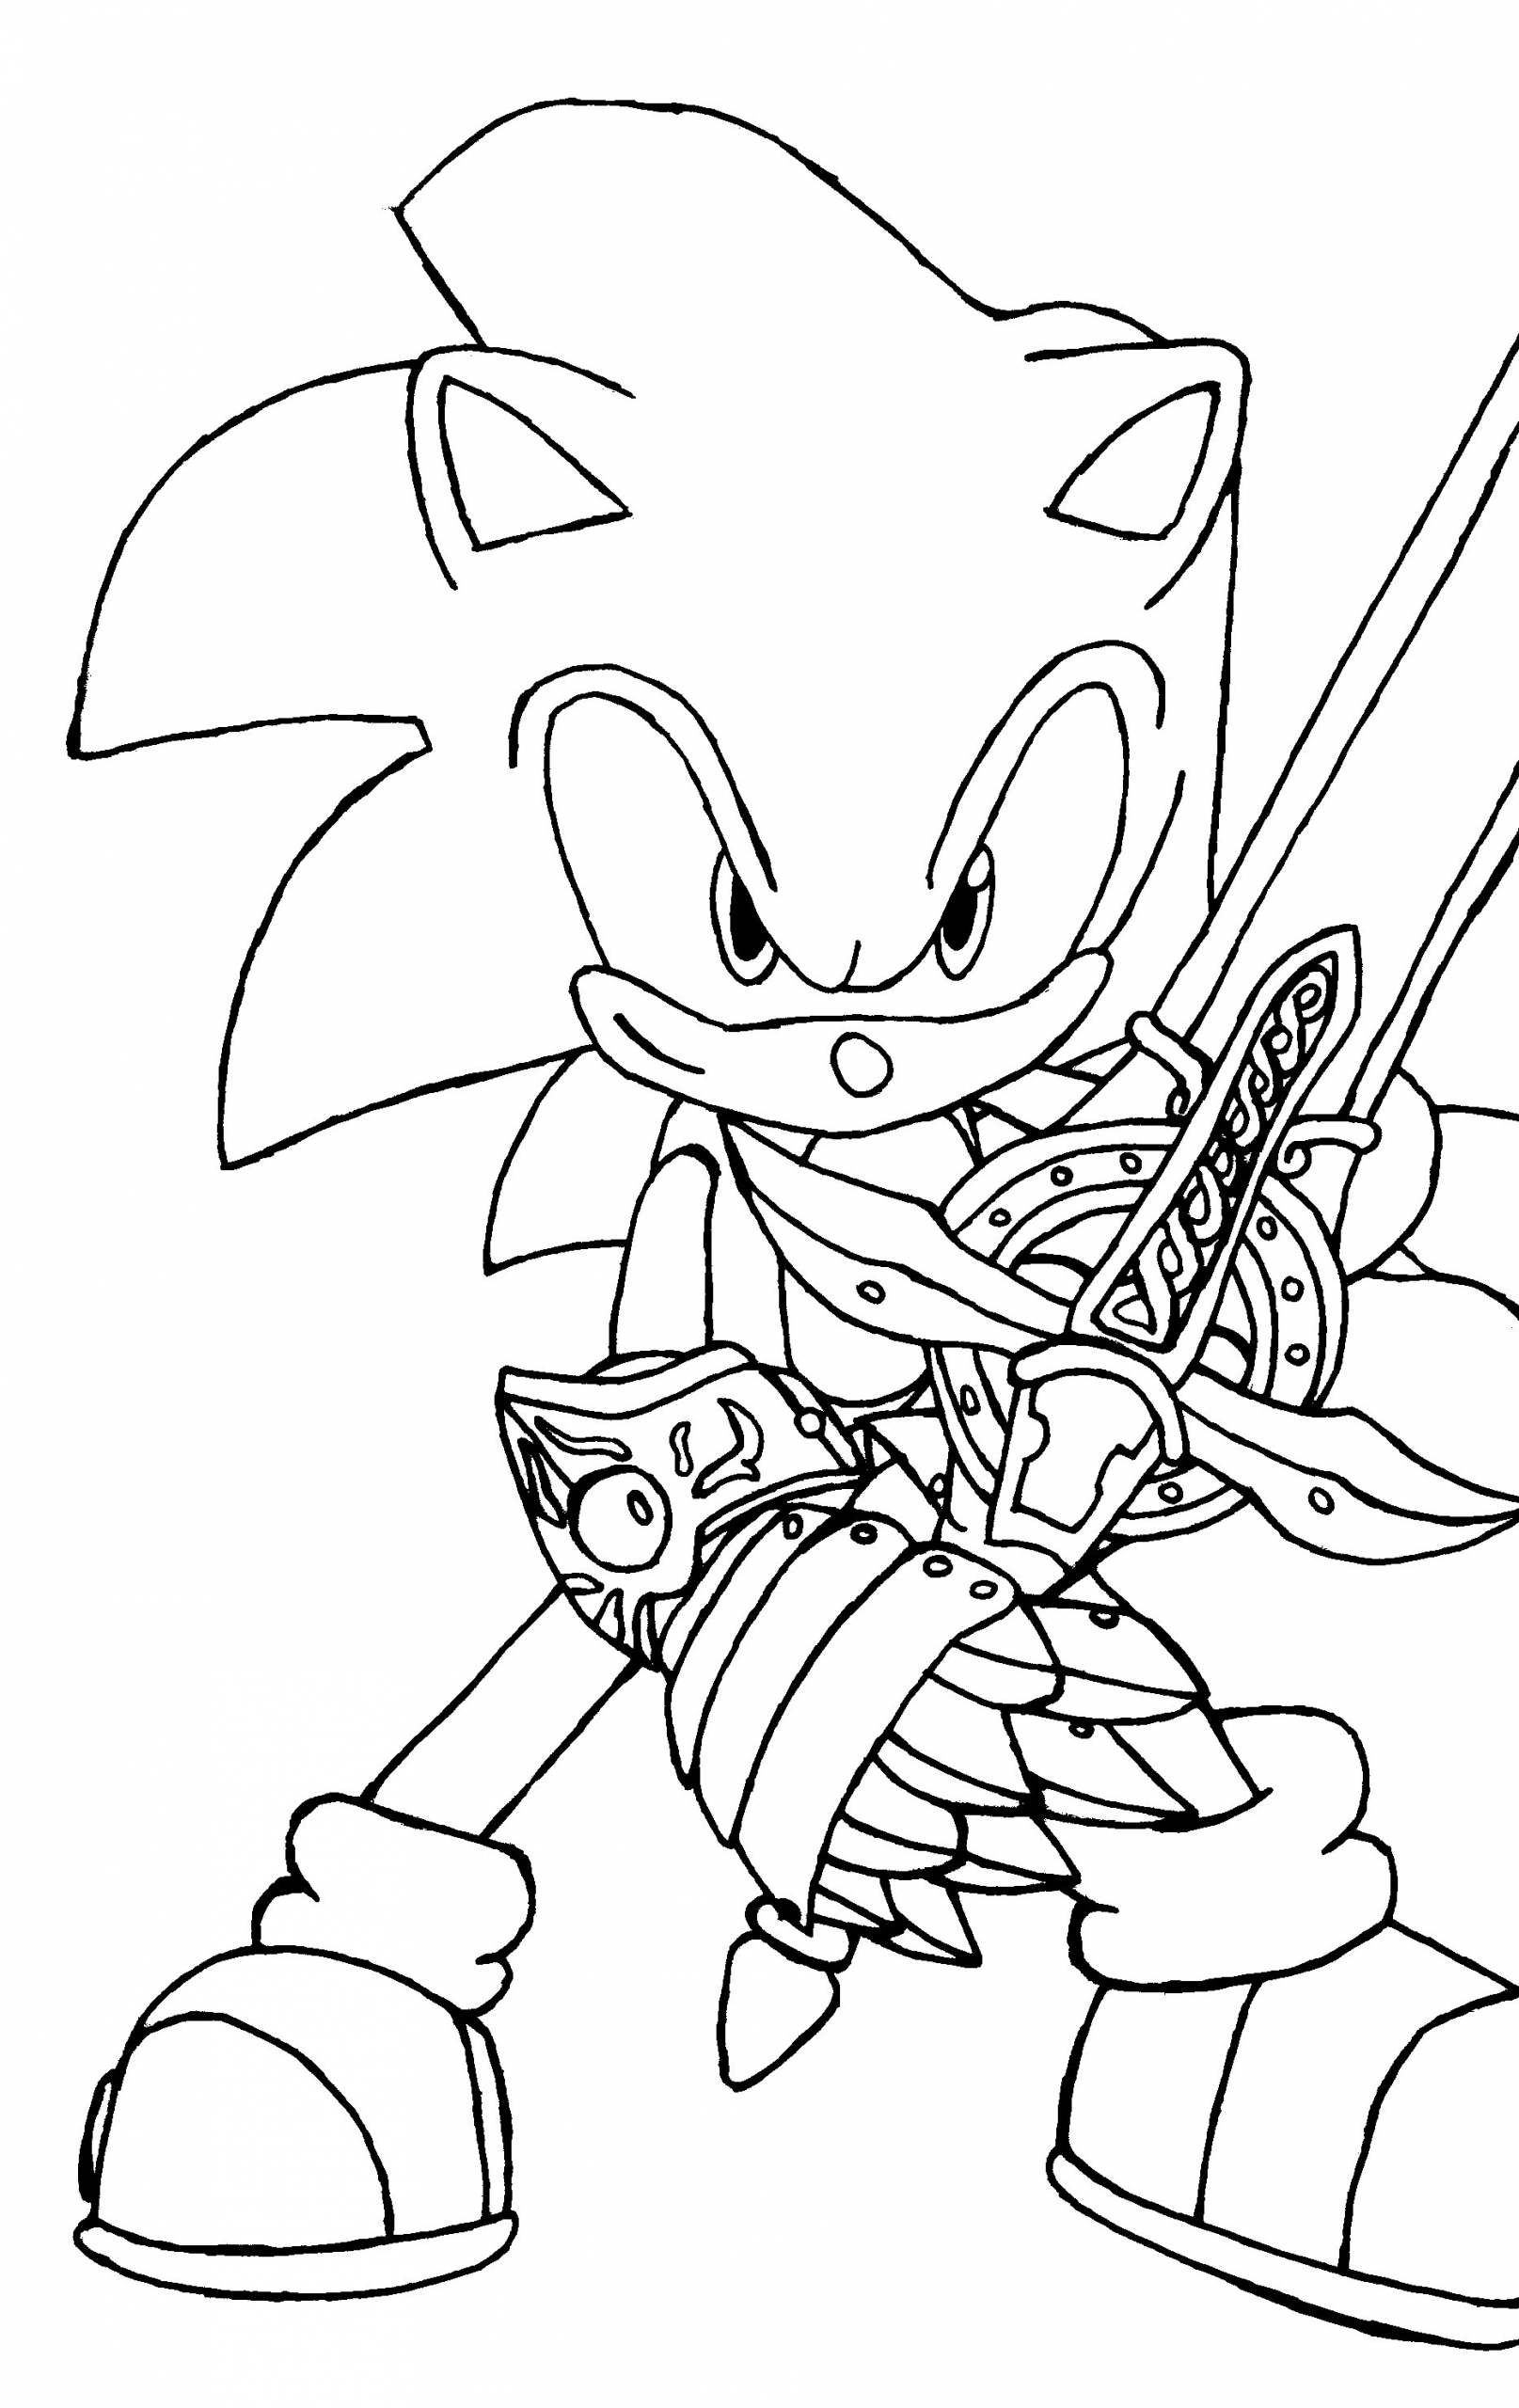 Free Coloring Pages For Toddlers
 Free Printable Sonic The Hedgehog Coloring Pages For Kids